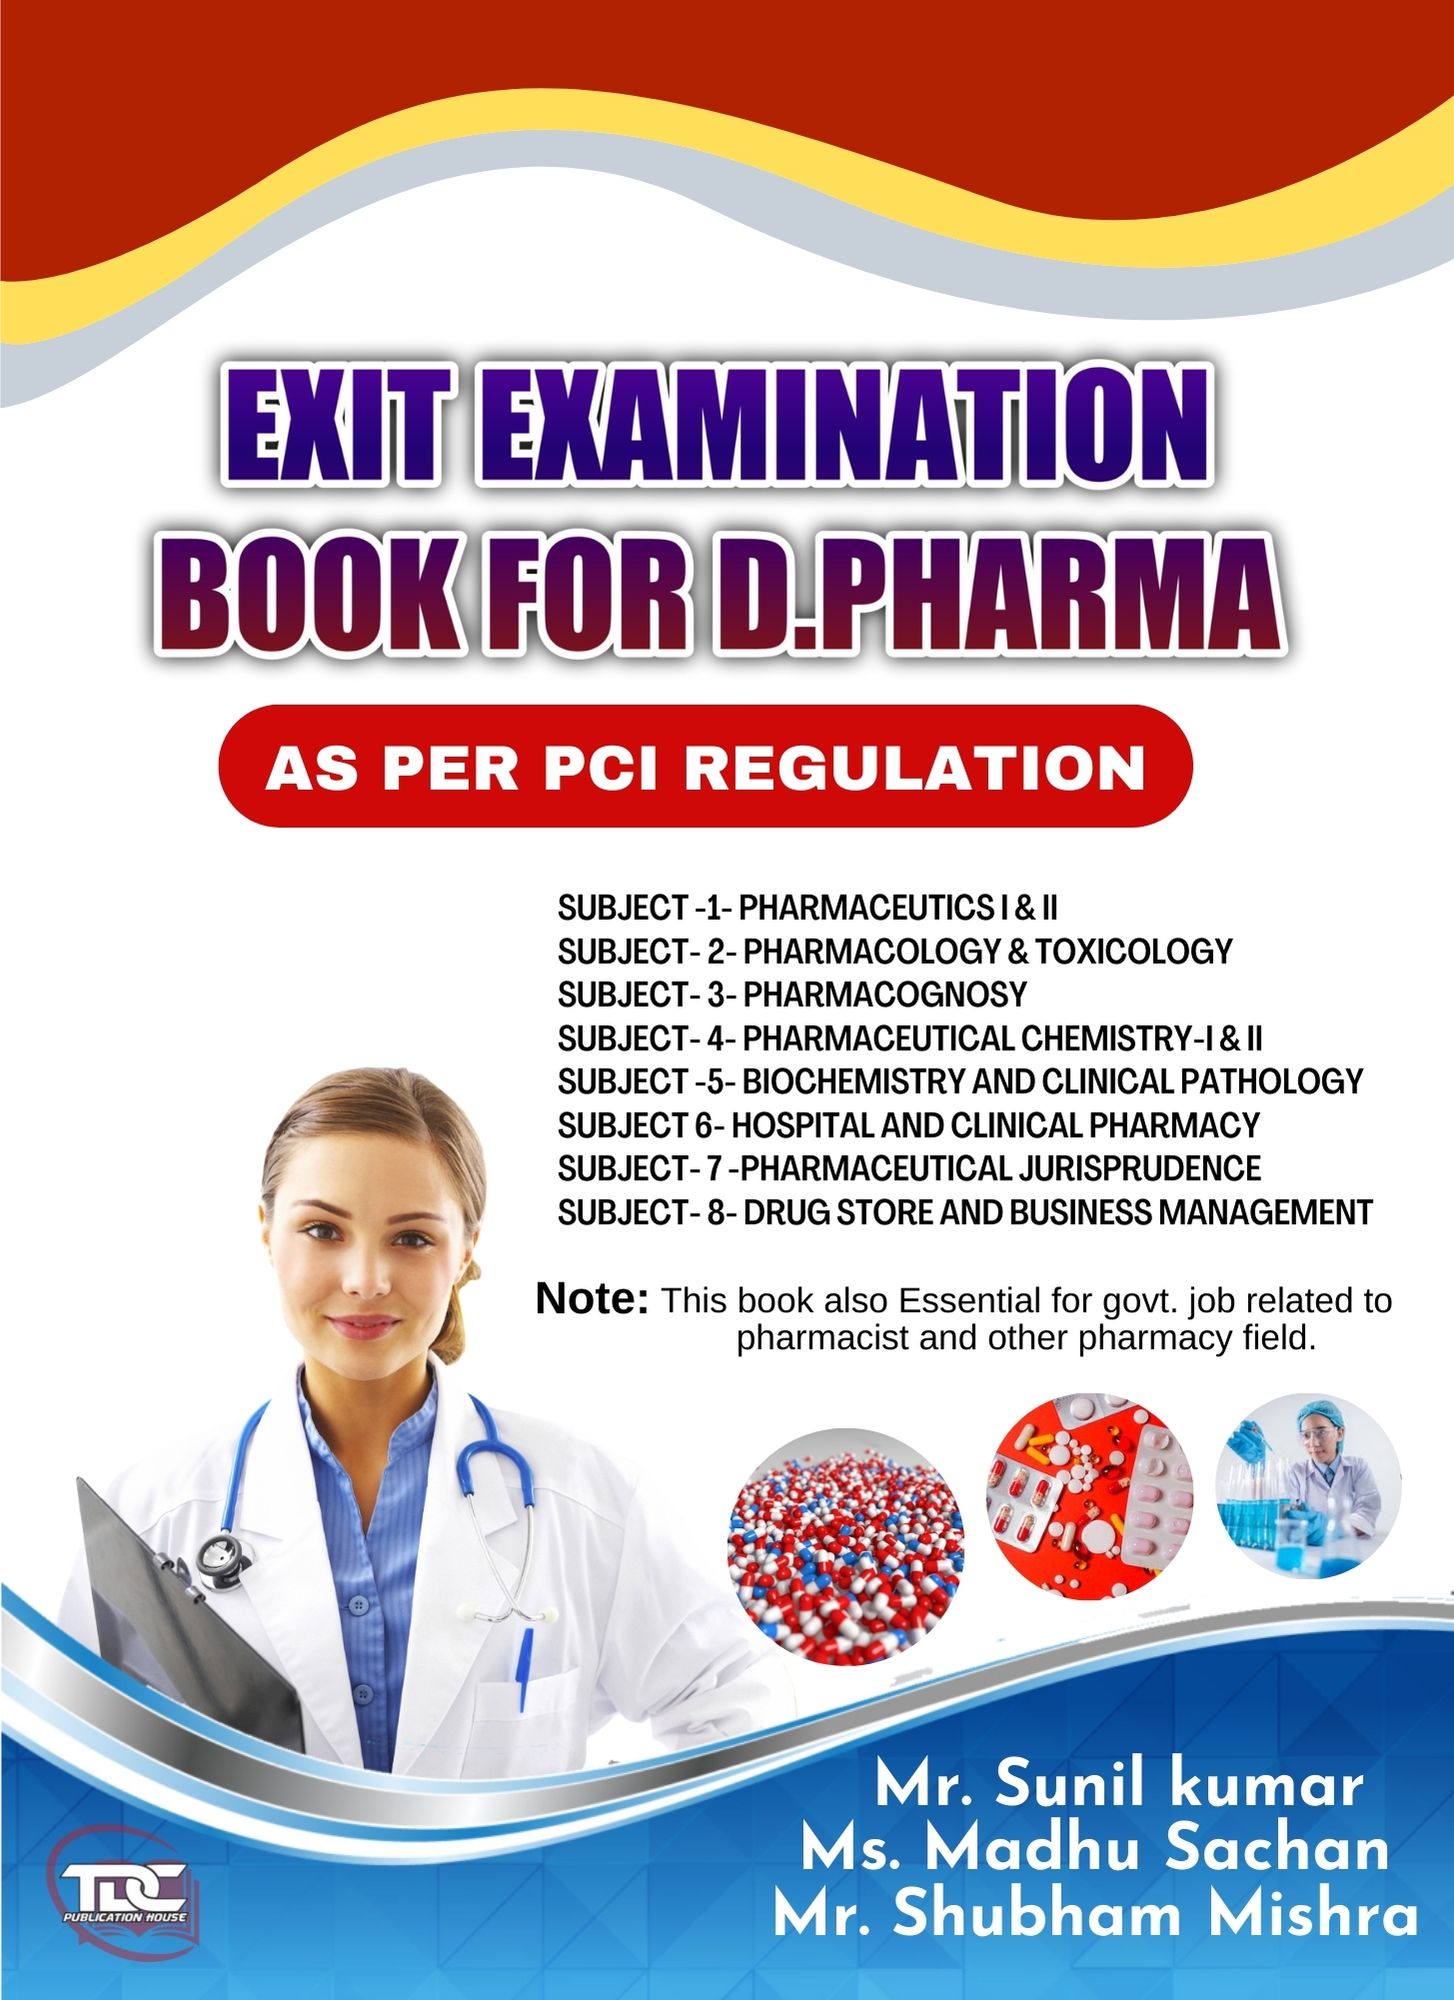 Exit Examination Book For D.Pharma